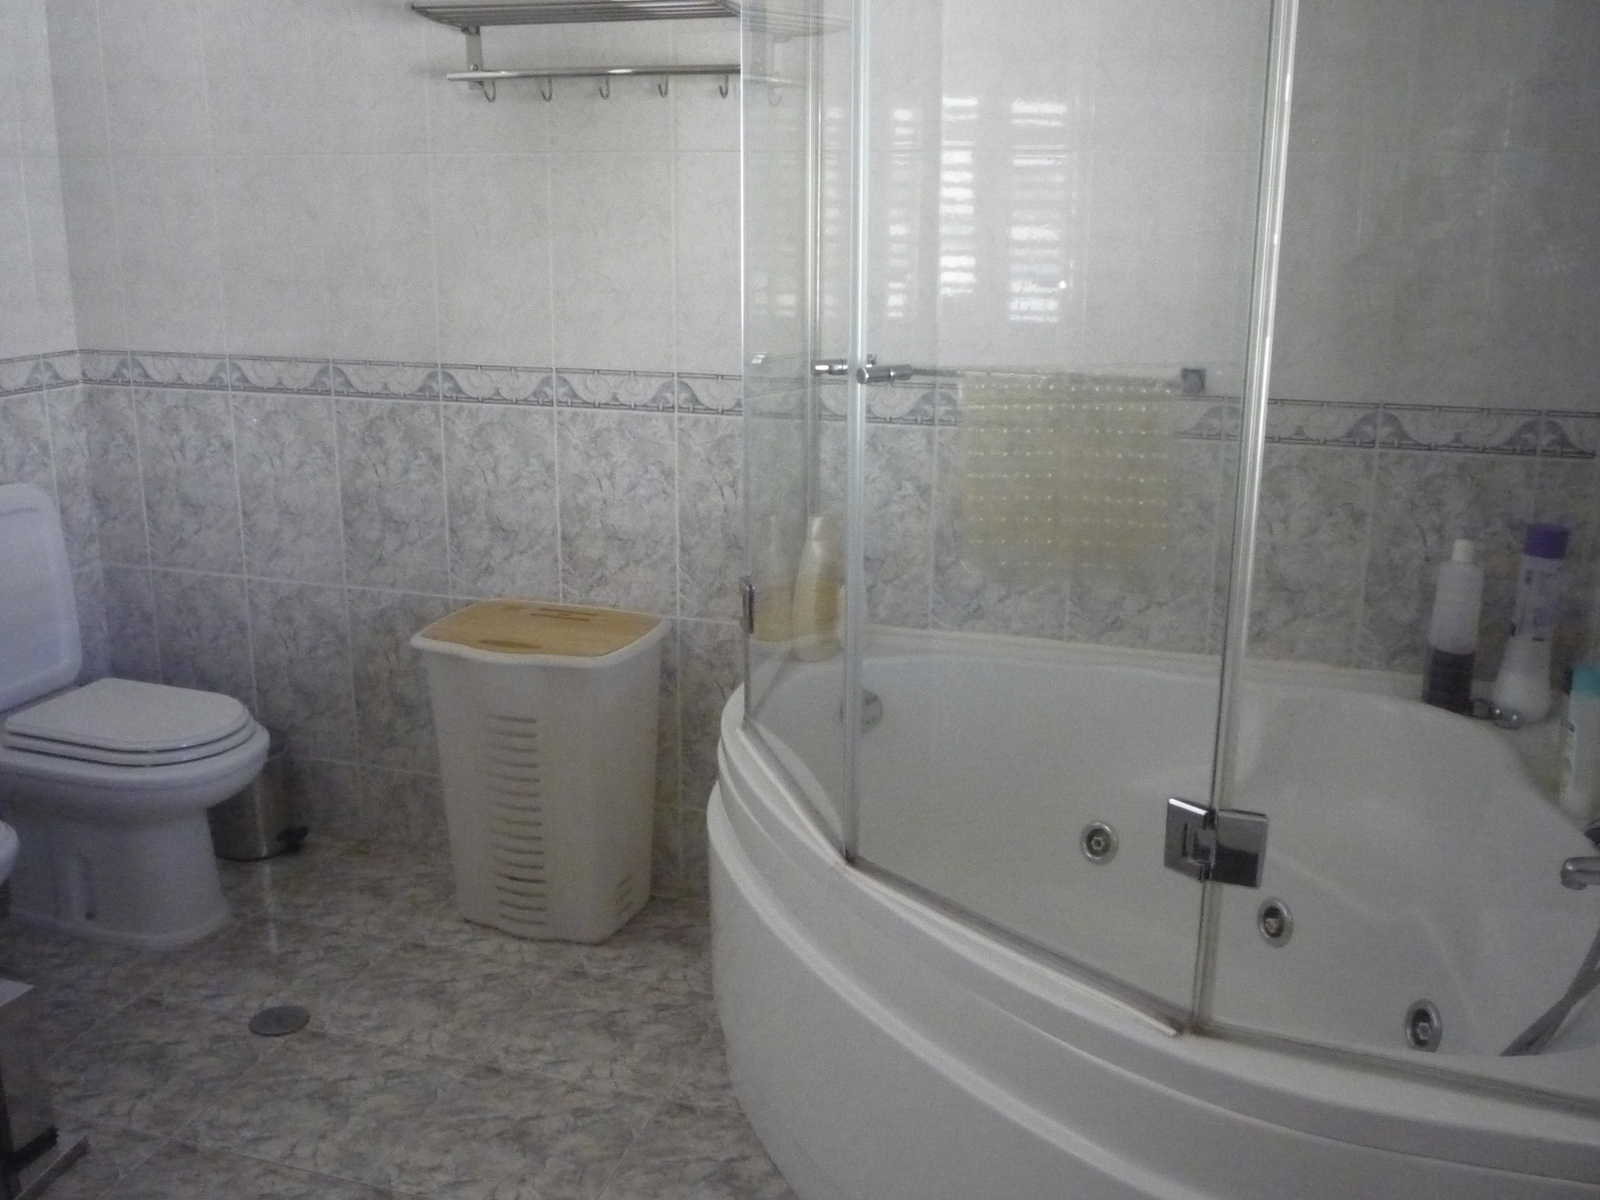 Used House in Casal da Silveira (Famões) – 206 m²